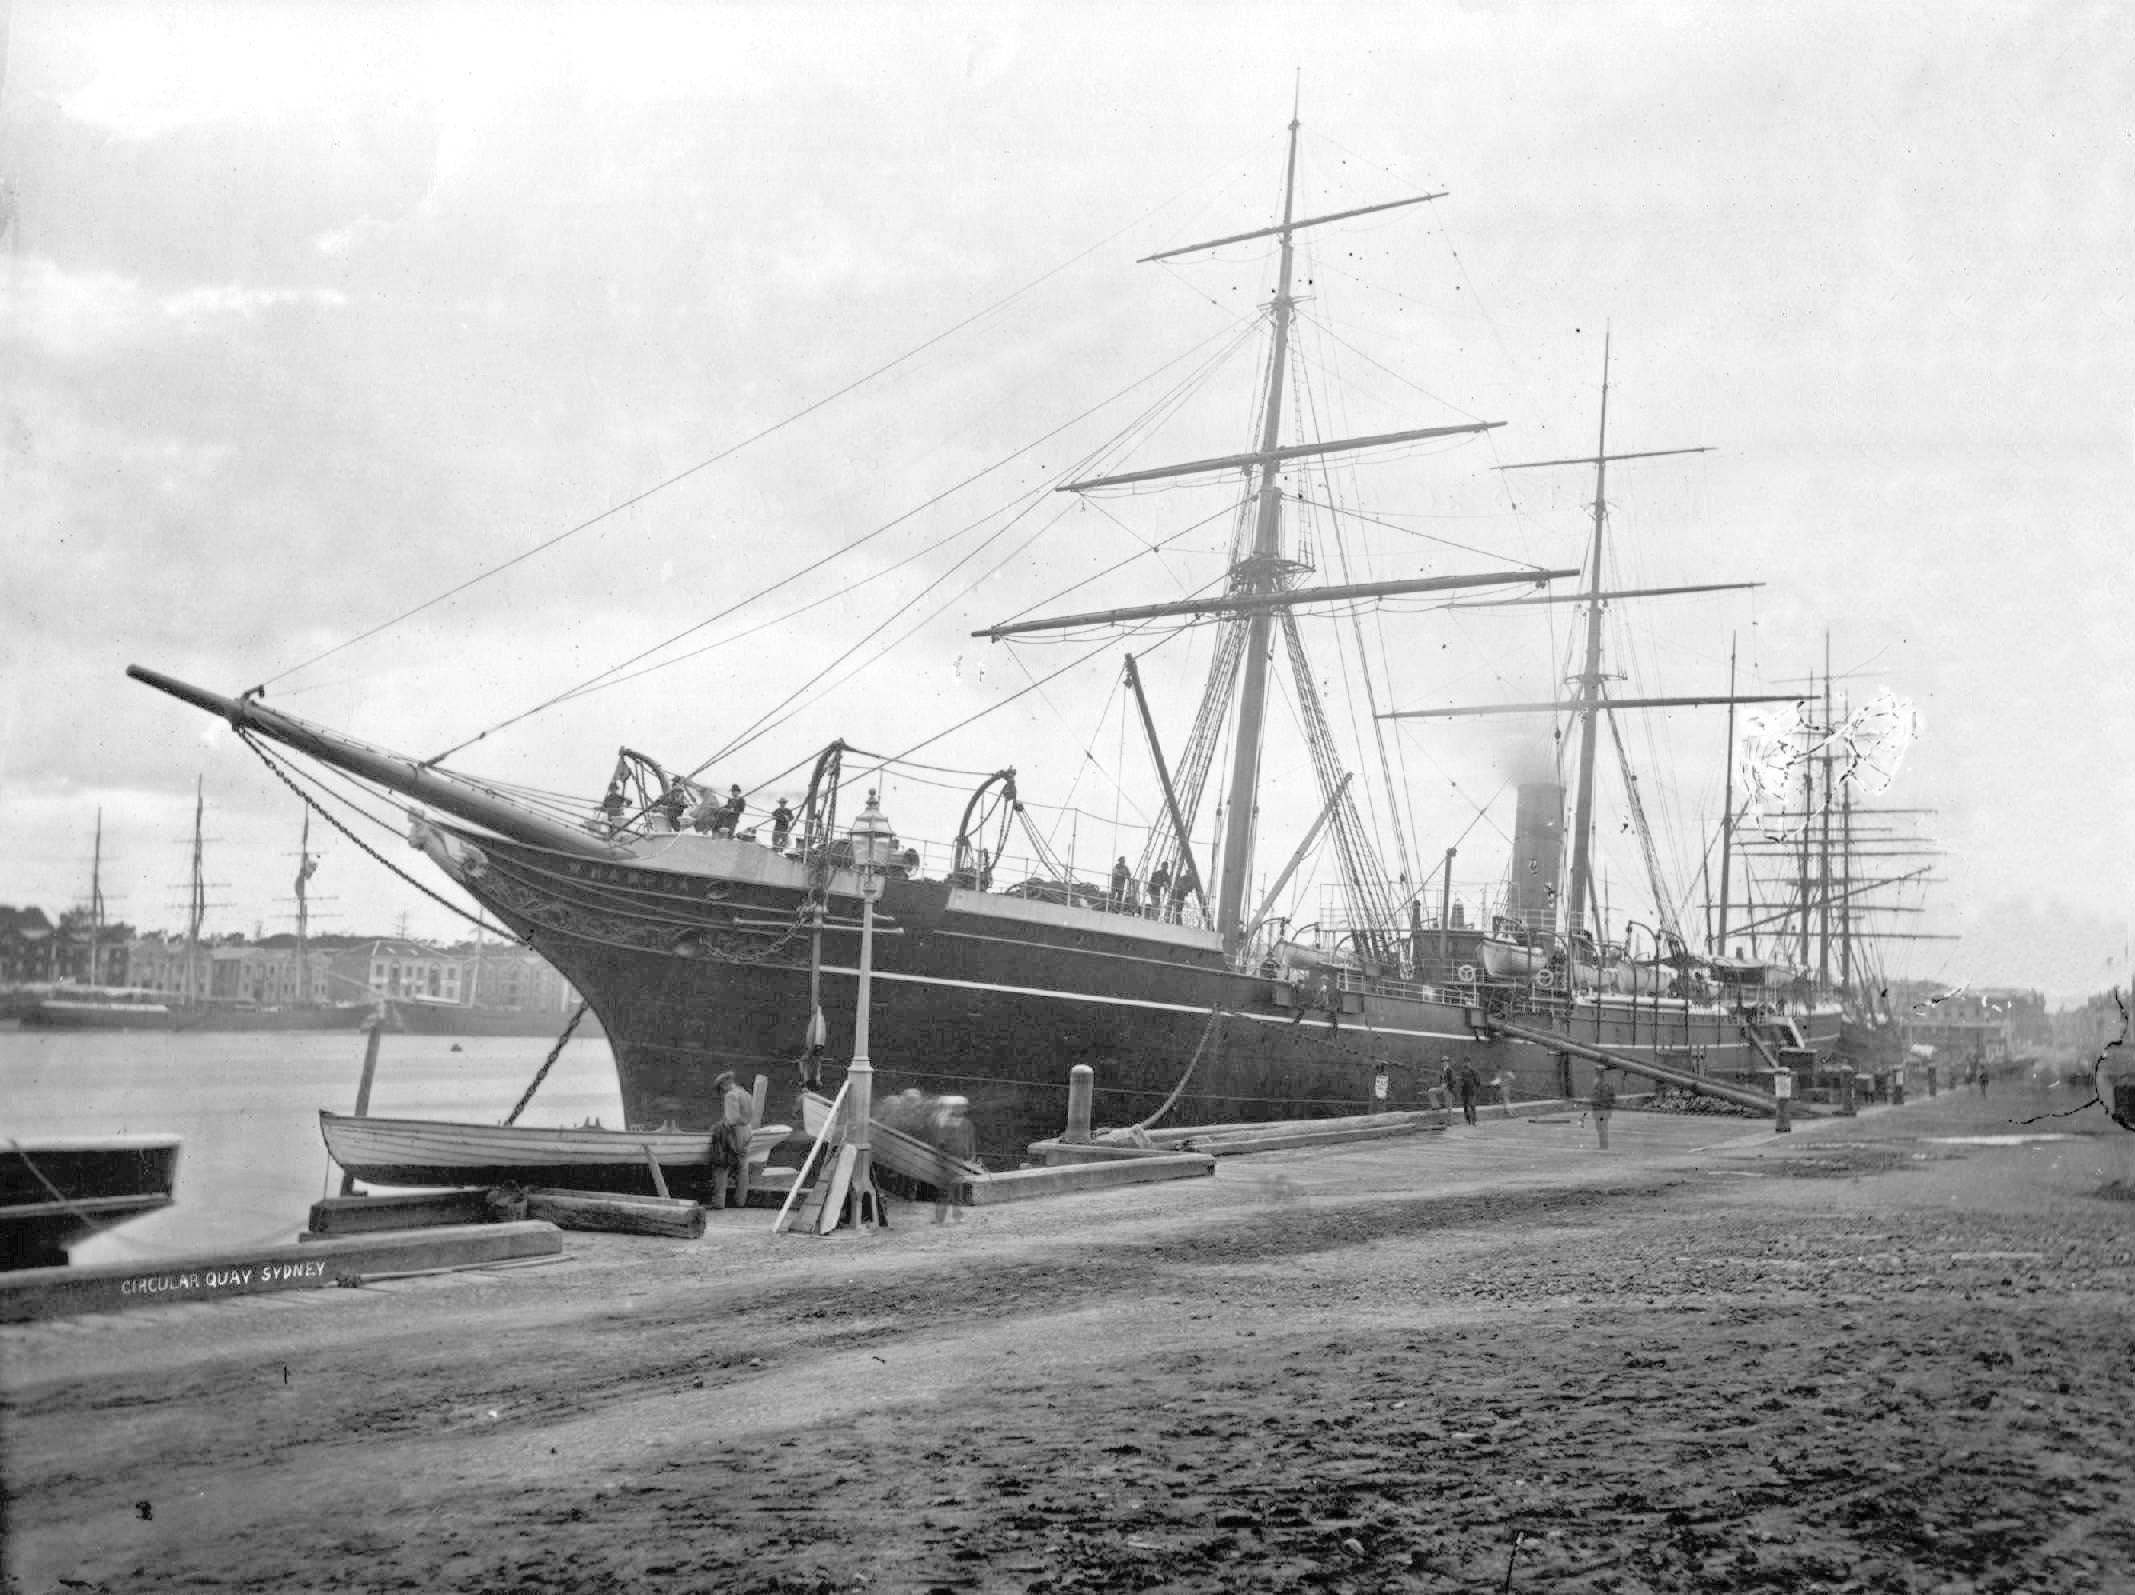 A steel screw steamer, also rigged as a Barque.  Built in 1882 at Greenock by Scott & Co for China Navigation Co Ltd.
Official Number:  86981
Tonnage:  1734 gross
Dimensions:  length 271', breadth 34', draught 24'
Port Of Registry:  London
Machinery: